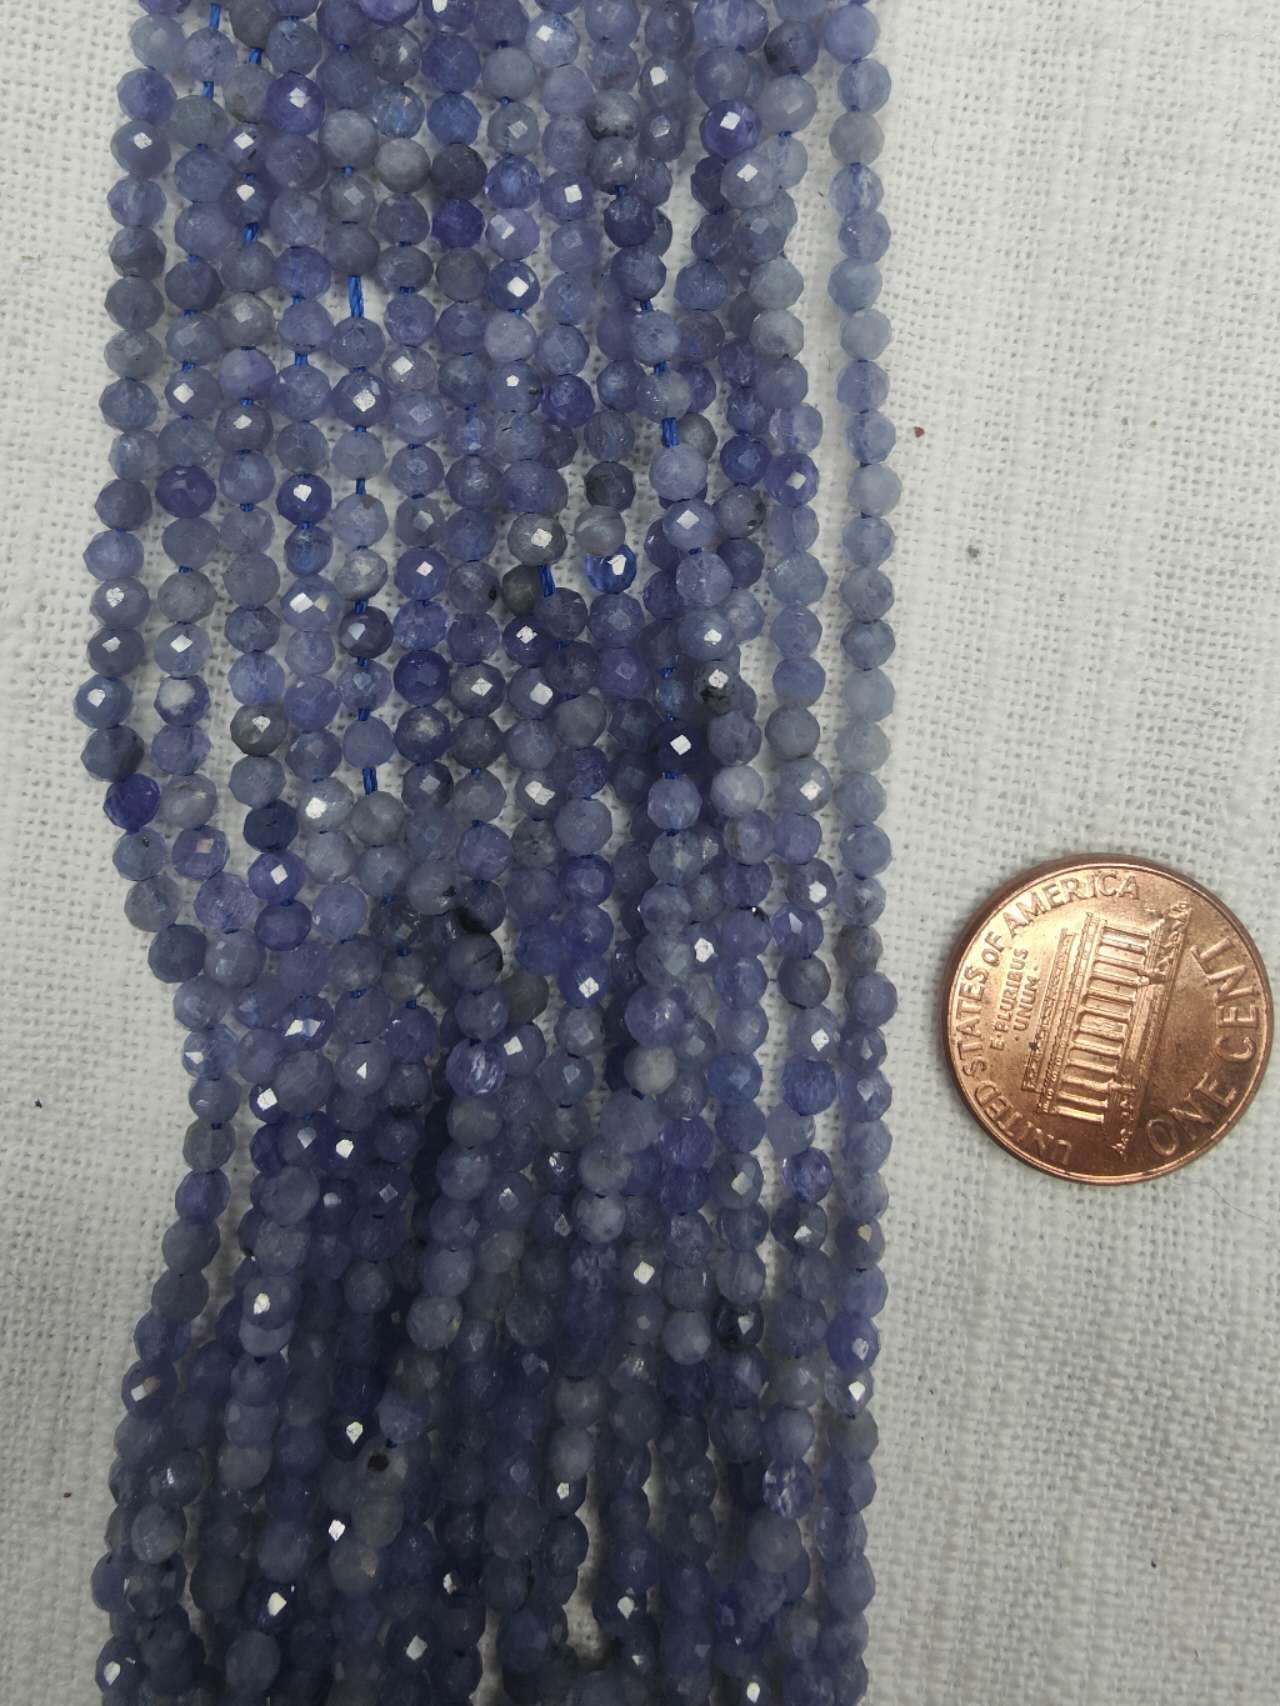 Tanzanite 3mm round faceted beads AAA grade 15.5"strand